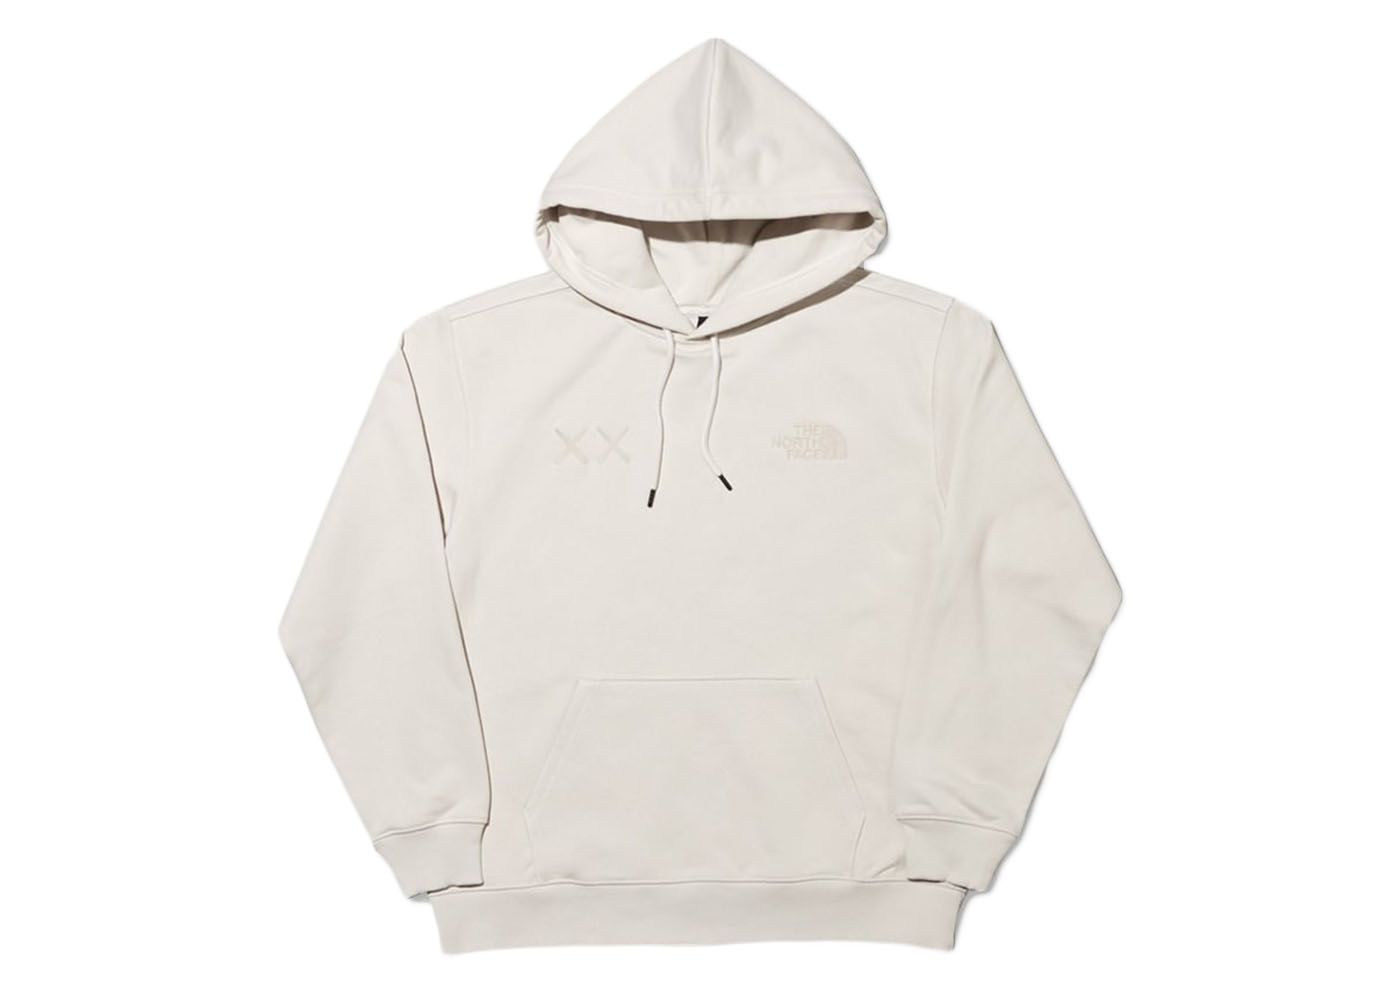 KAWS x The North Face Popover HoodieENDで購入